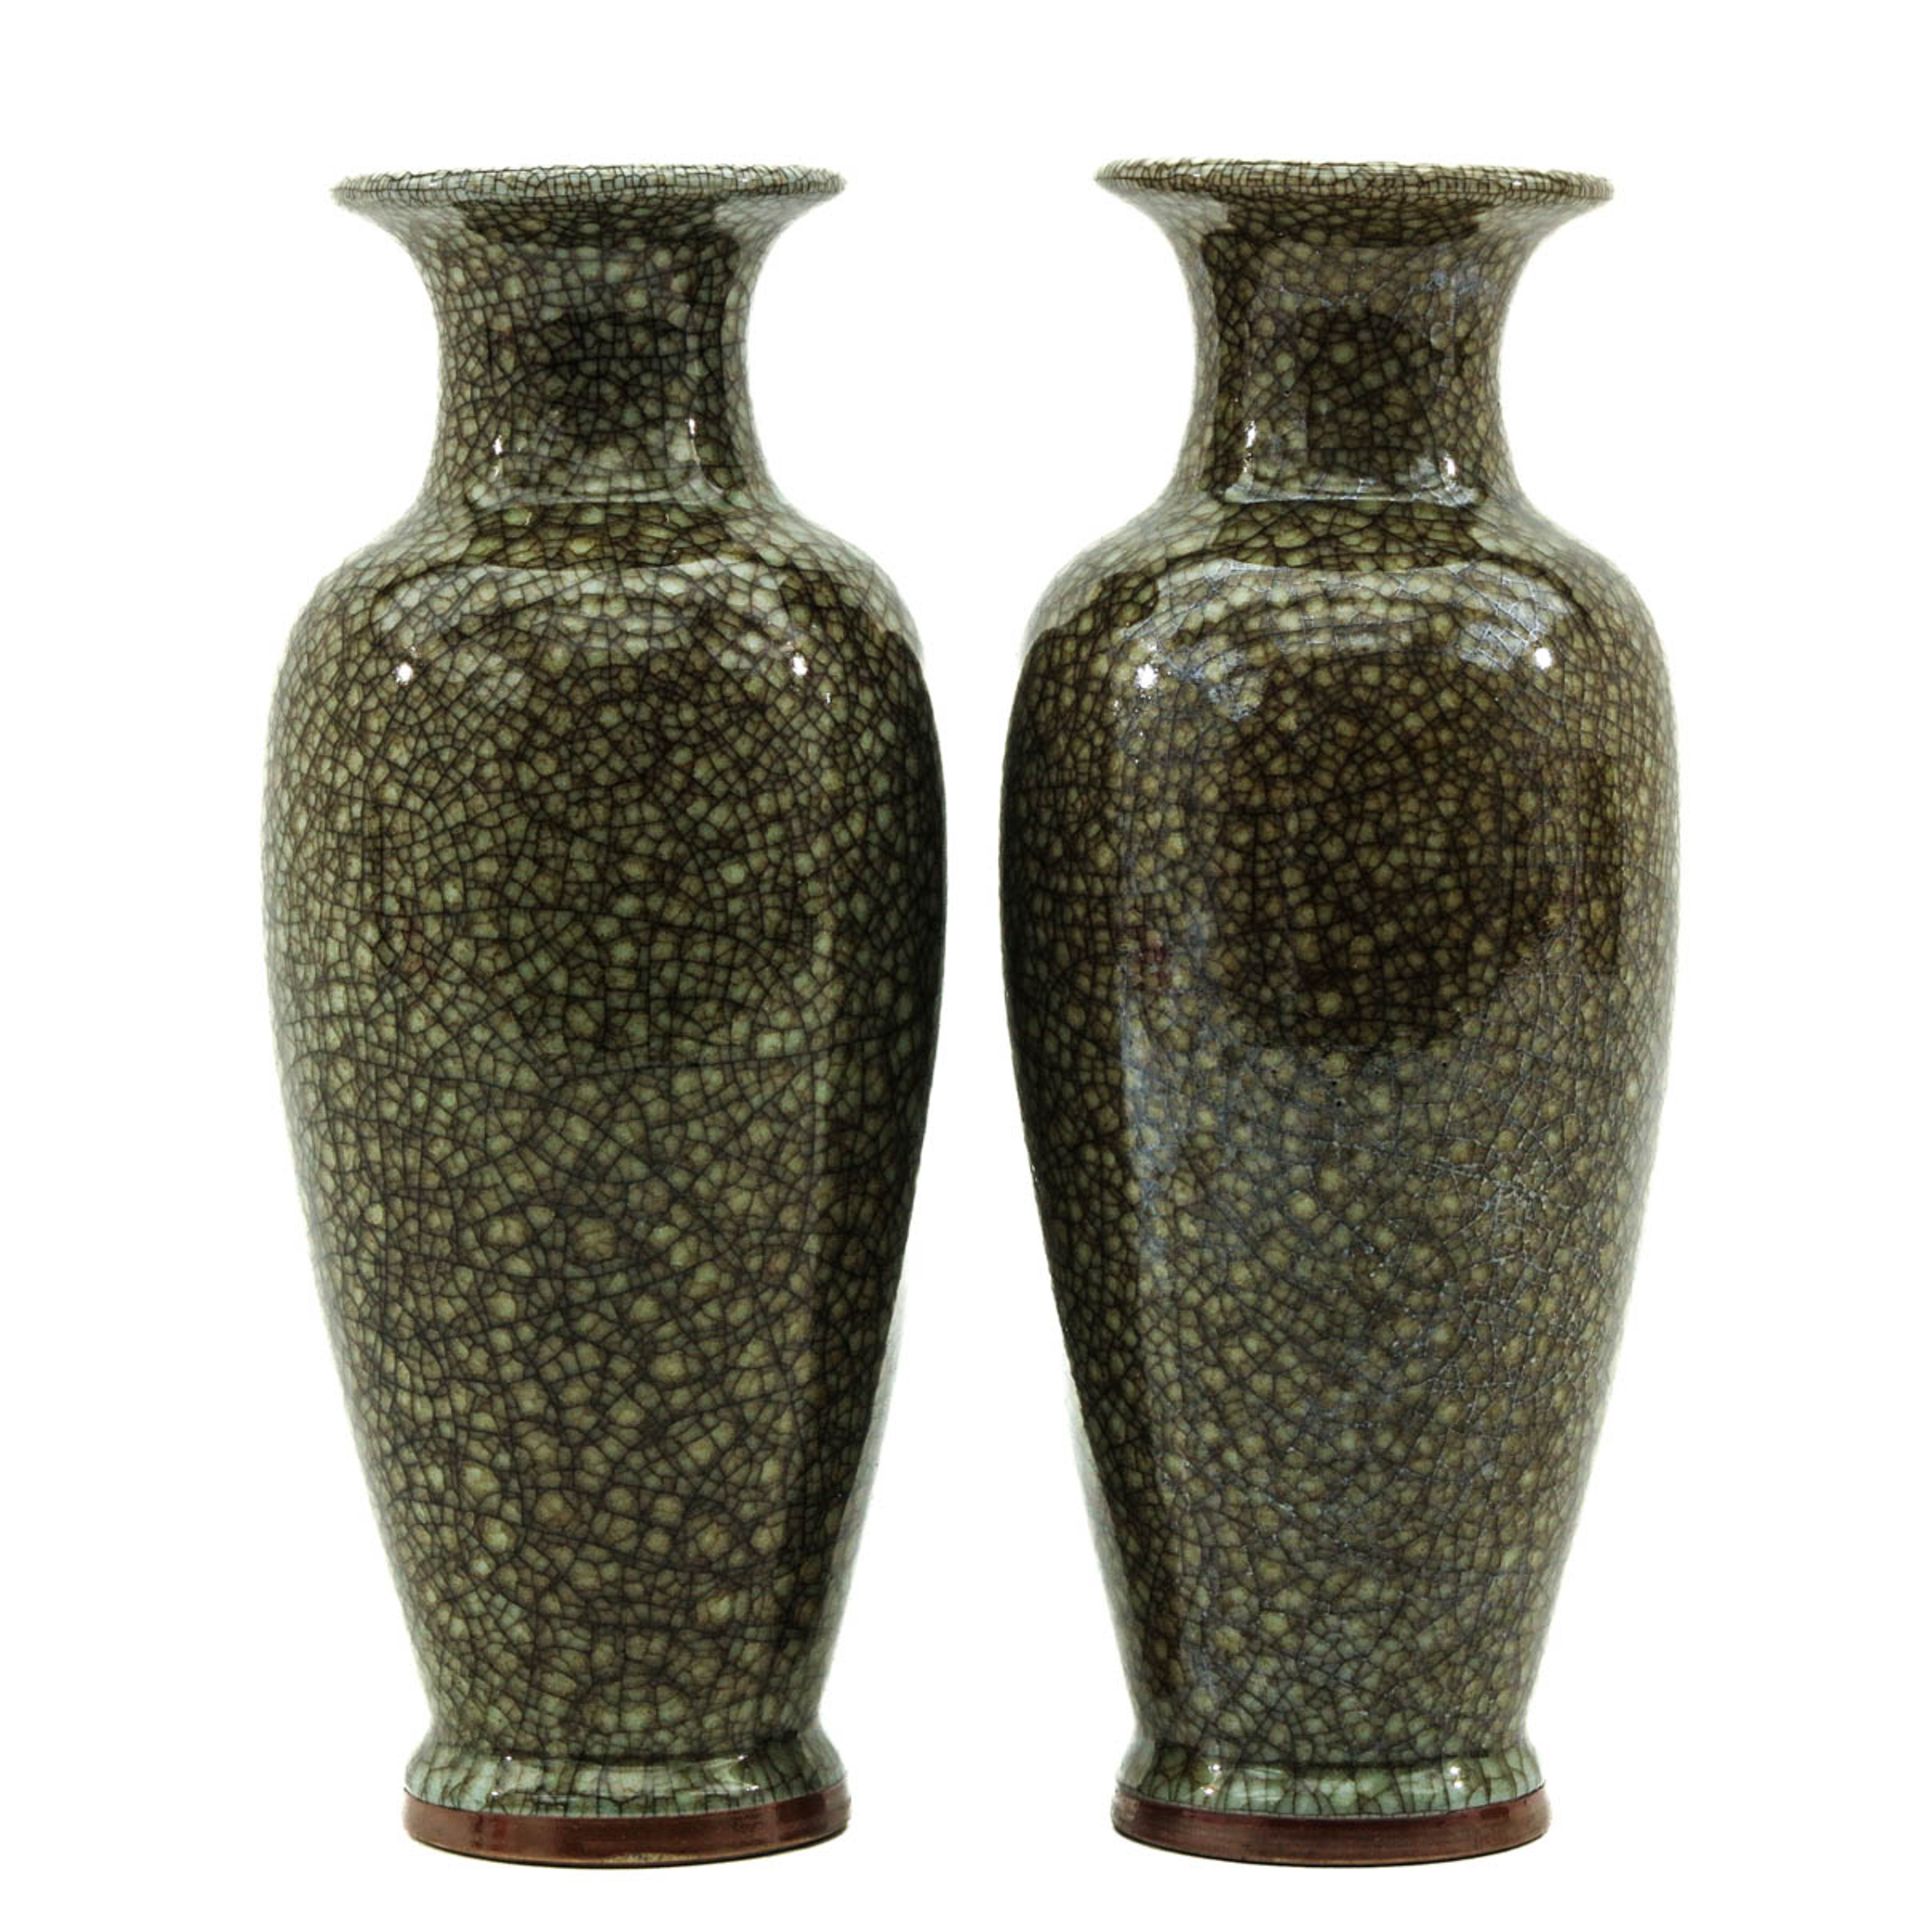 A Pair of Jun Ware Vases - Image 3 of 6